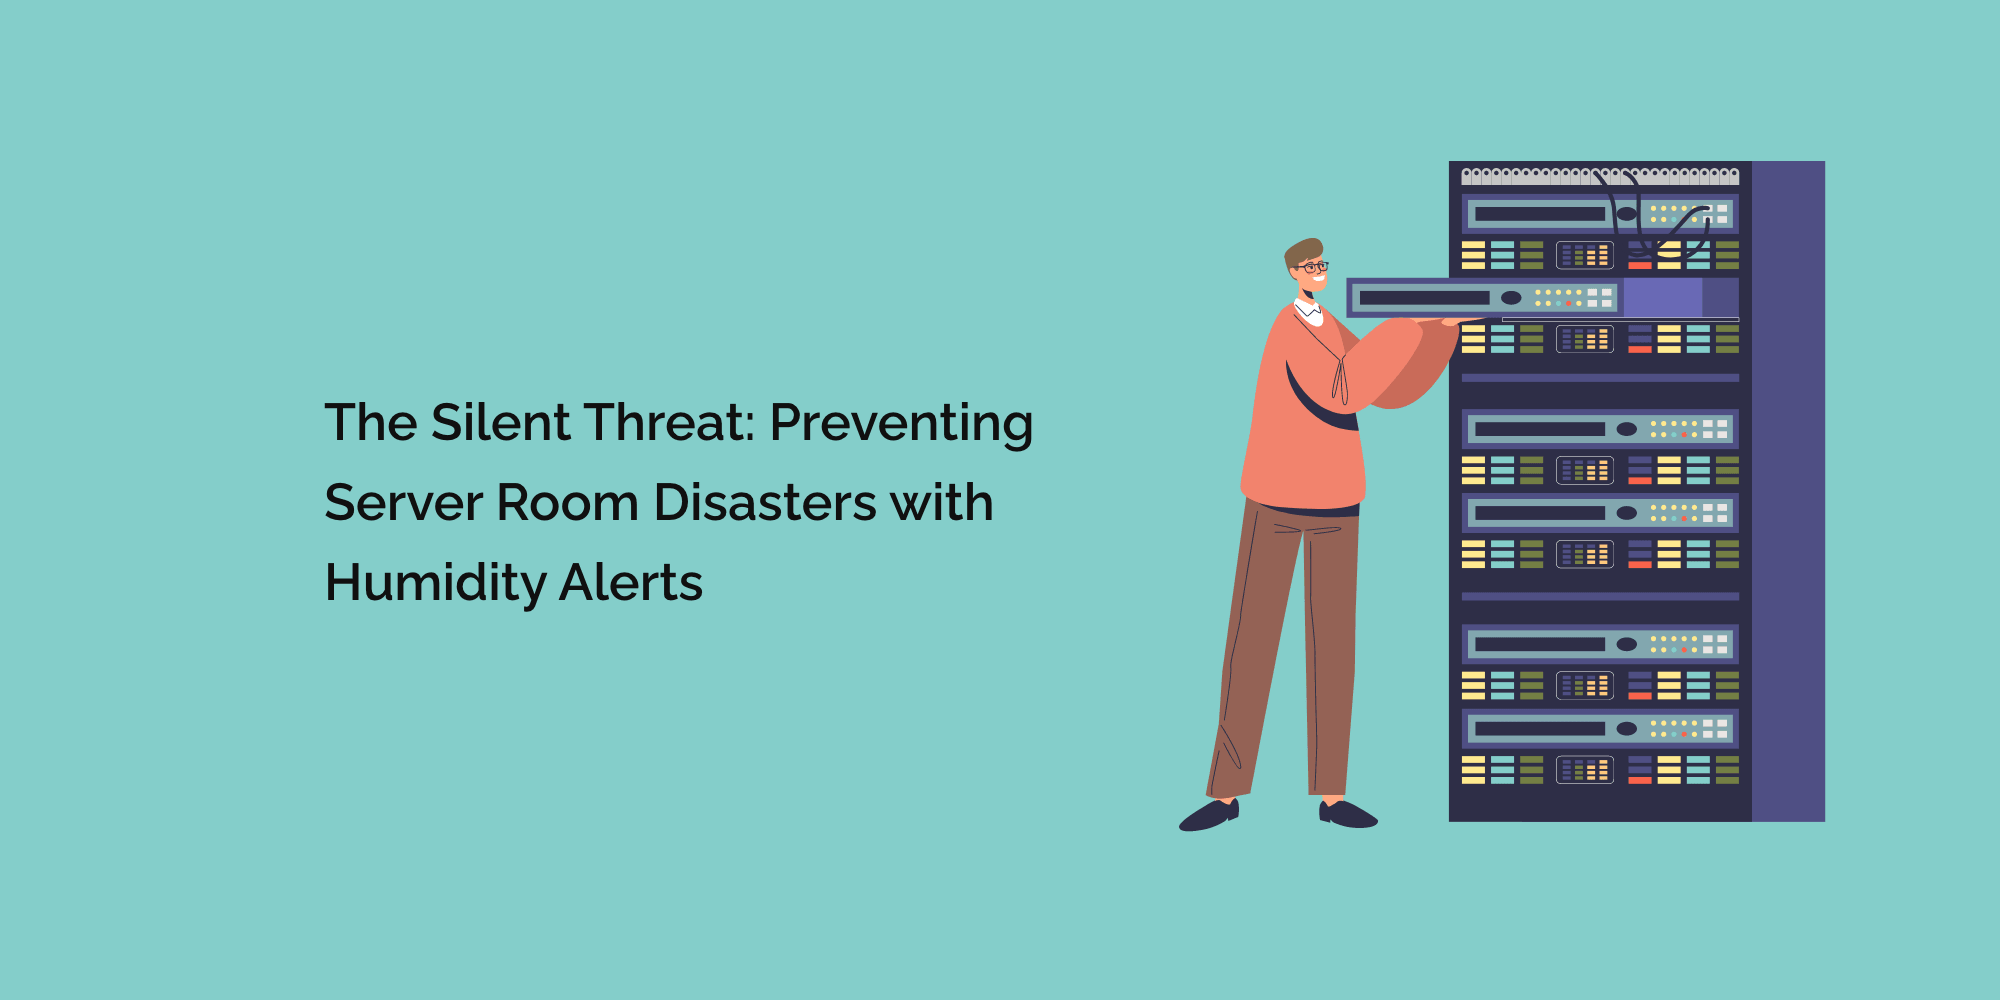 The Silent Threat: Preventing Server Room Disasters with Humidity Alerts